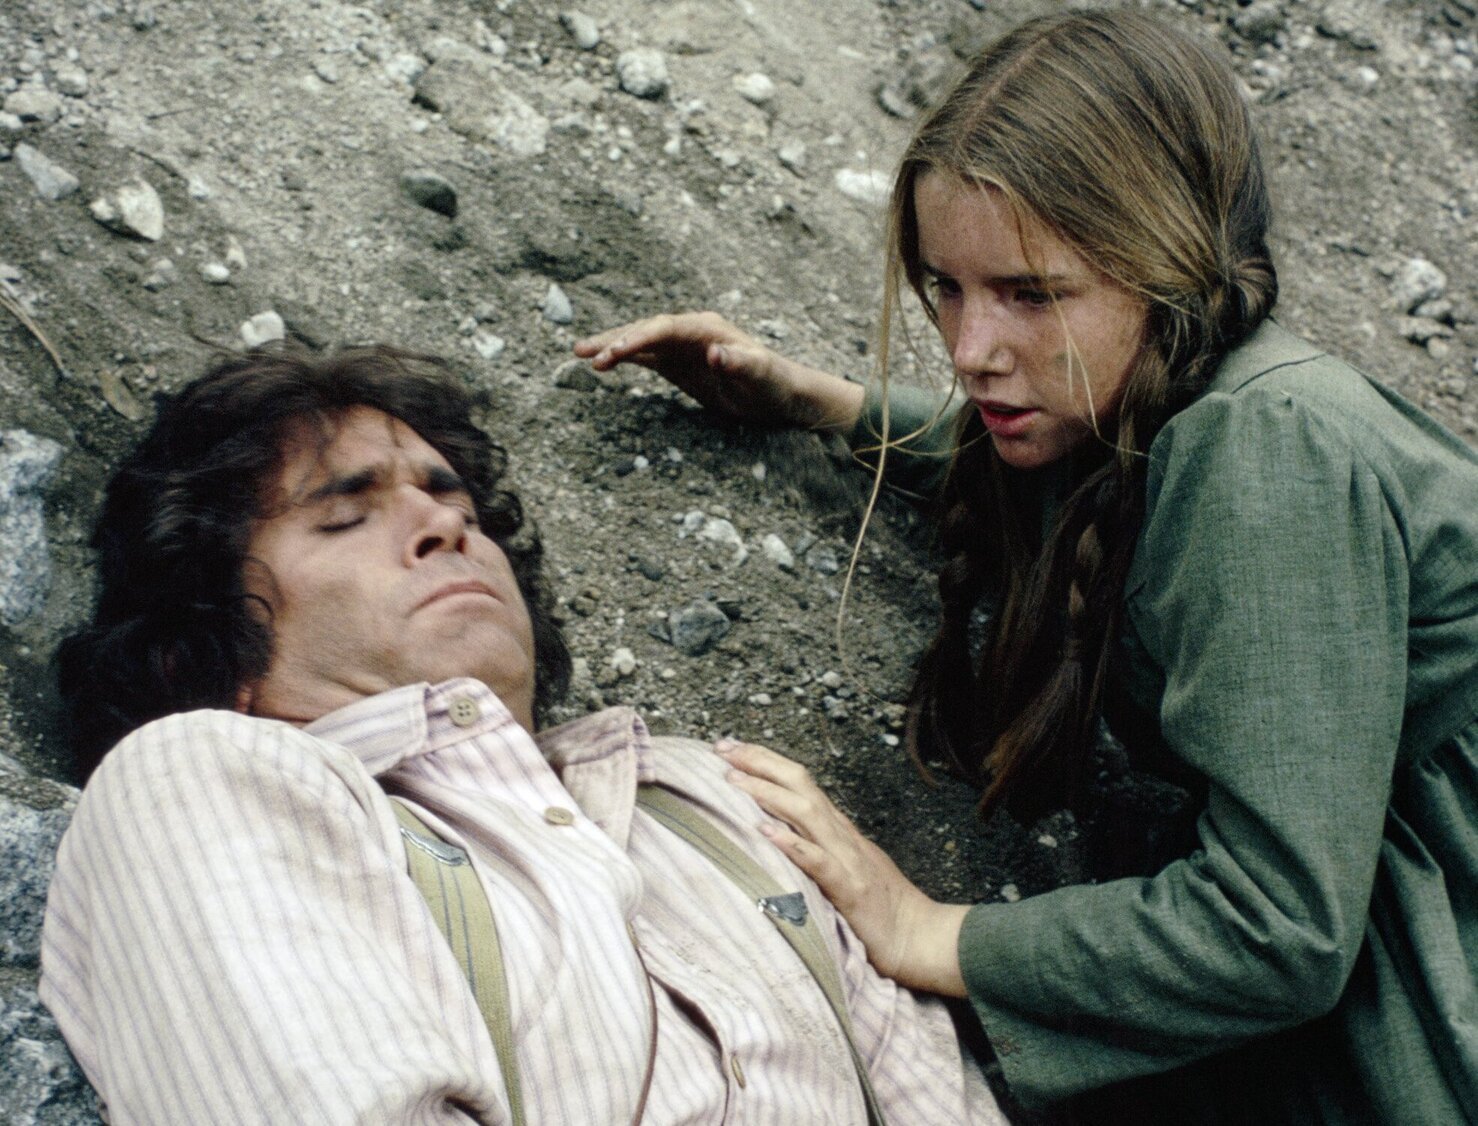 Michael Landon as Charles Ingalls lying in the dirt as Melissa Gilbert as Laura Ingalls bends down beside him.